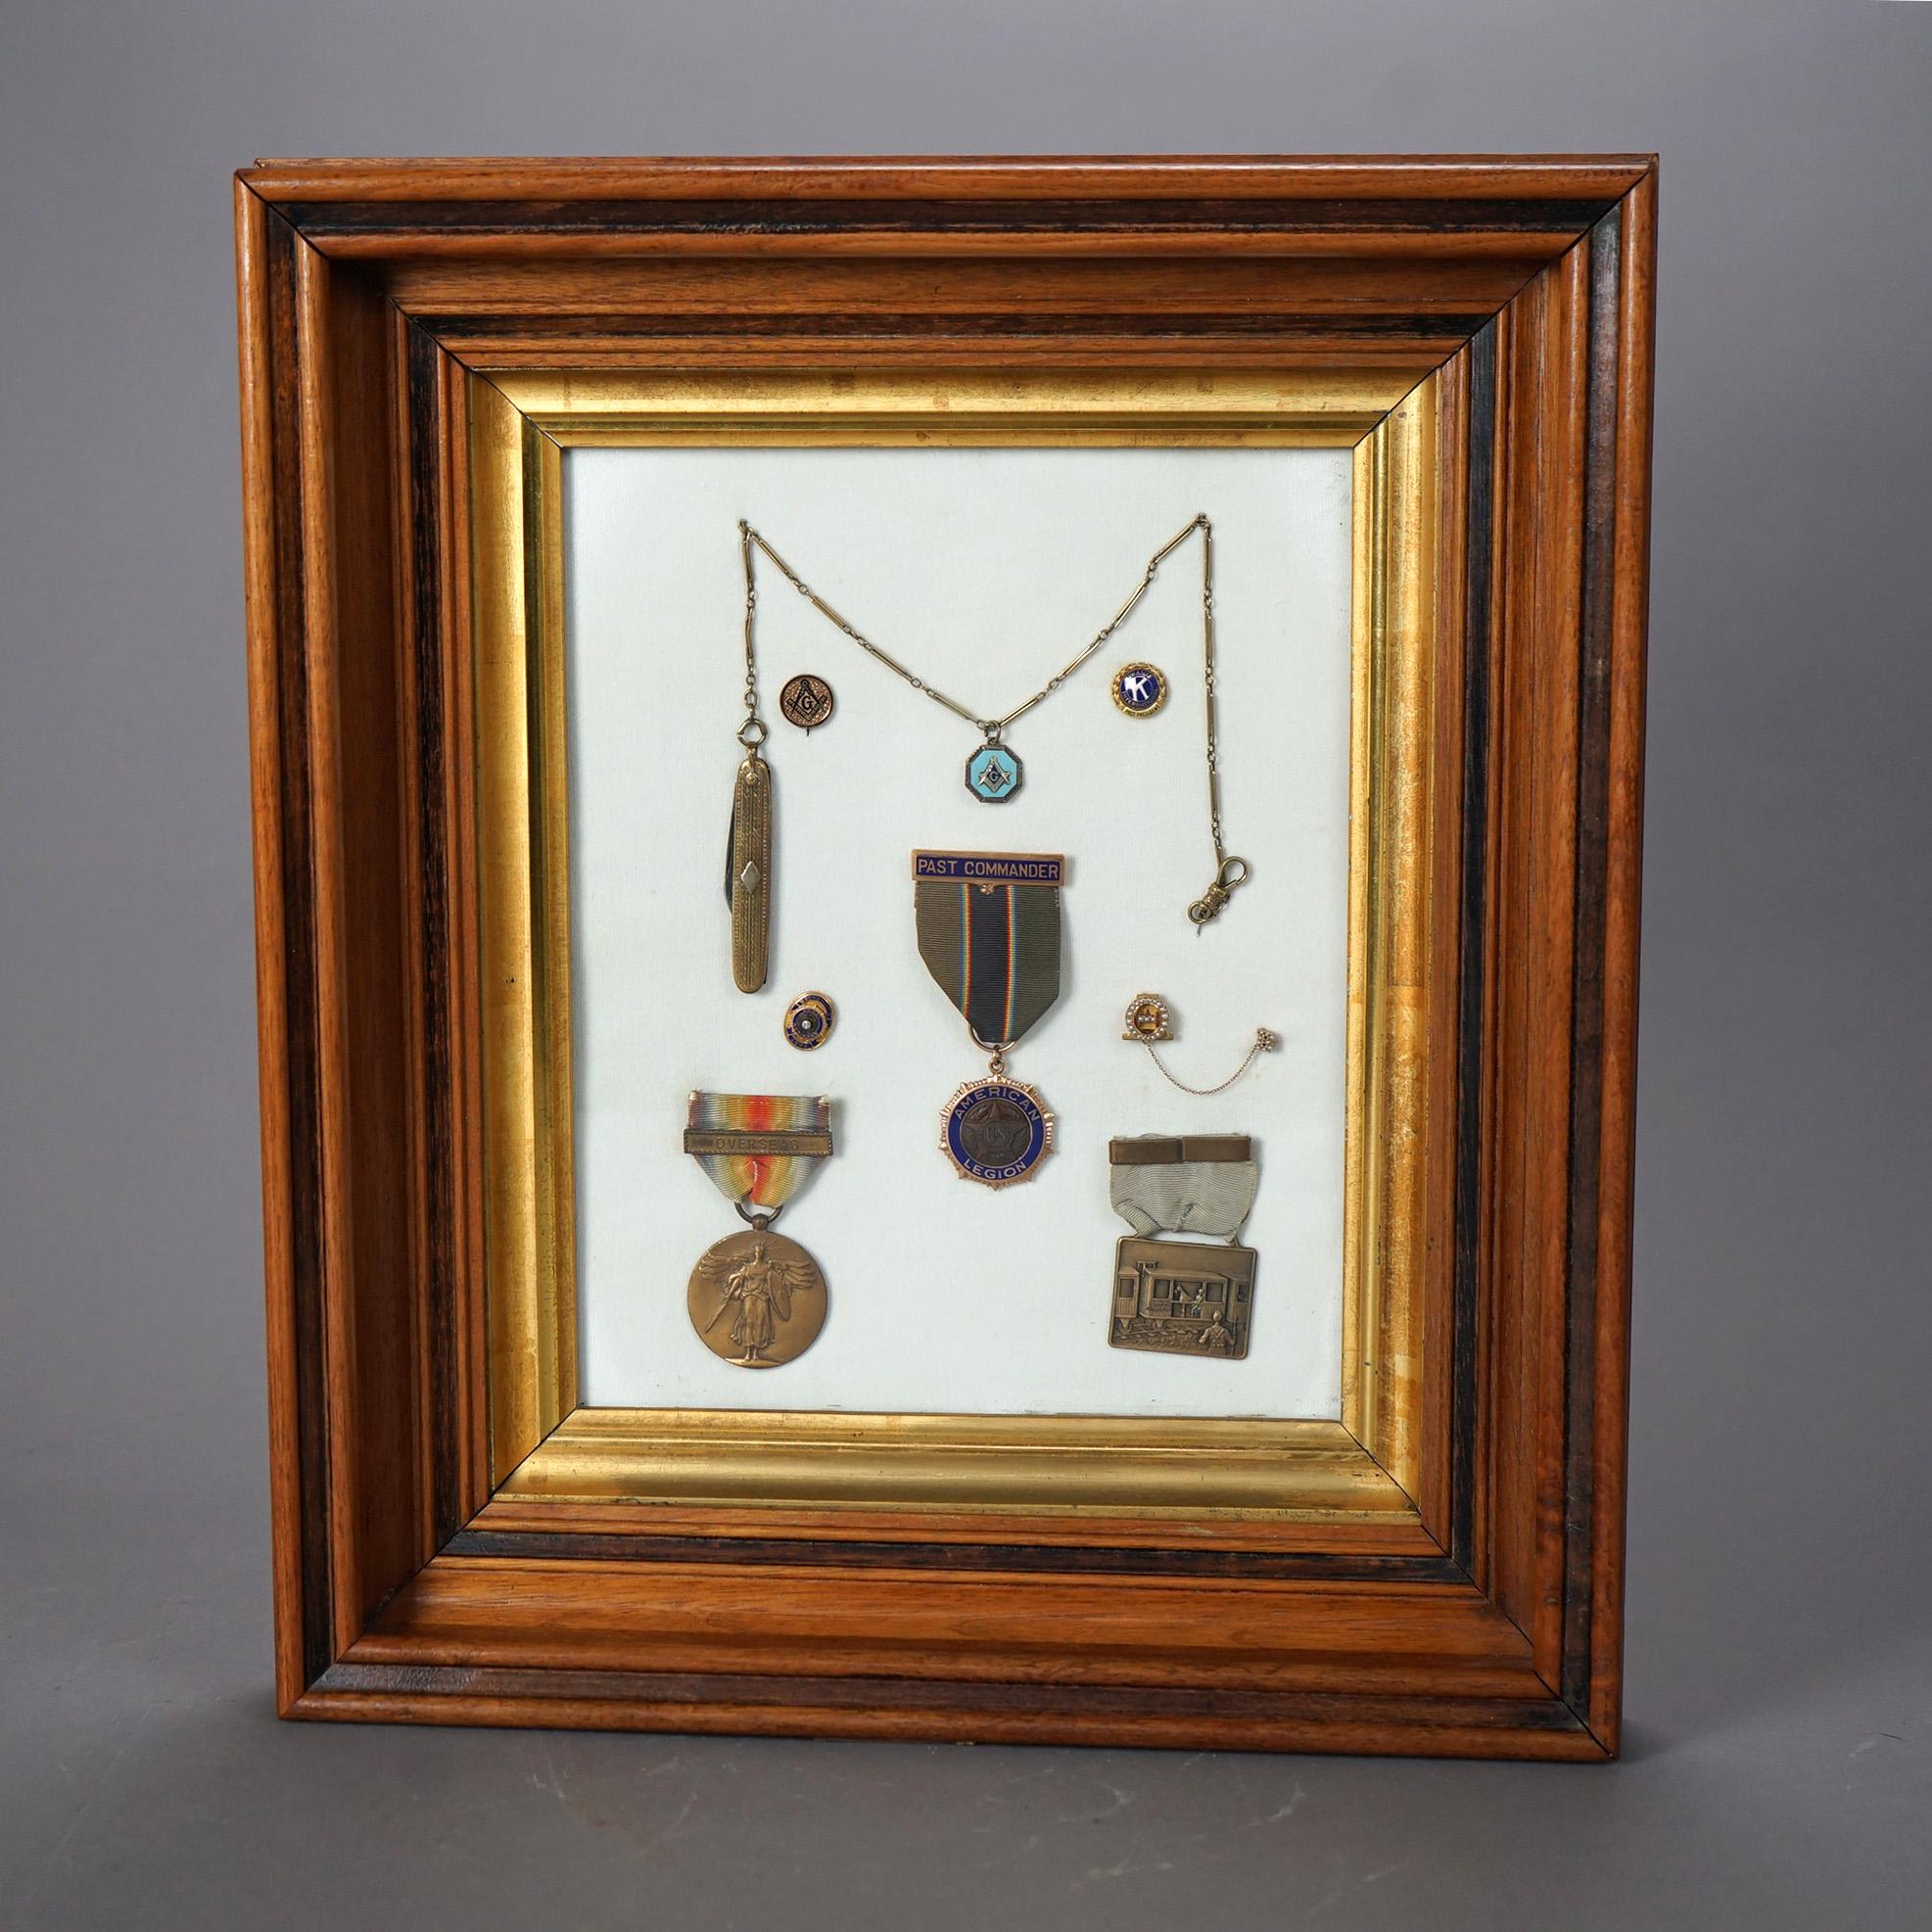 Set of Service Medals in Shadow Box Display, 20th C

Measures - 15